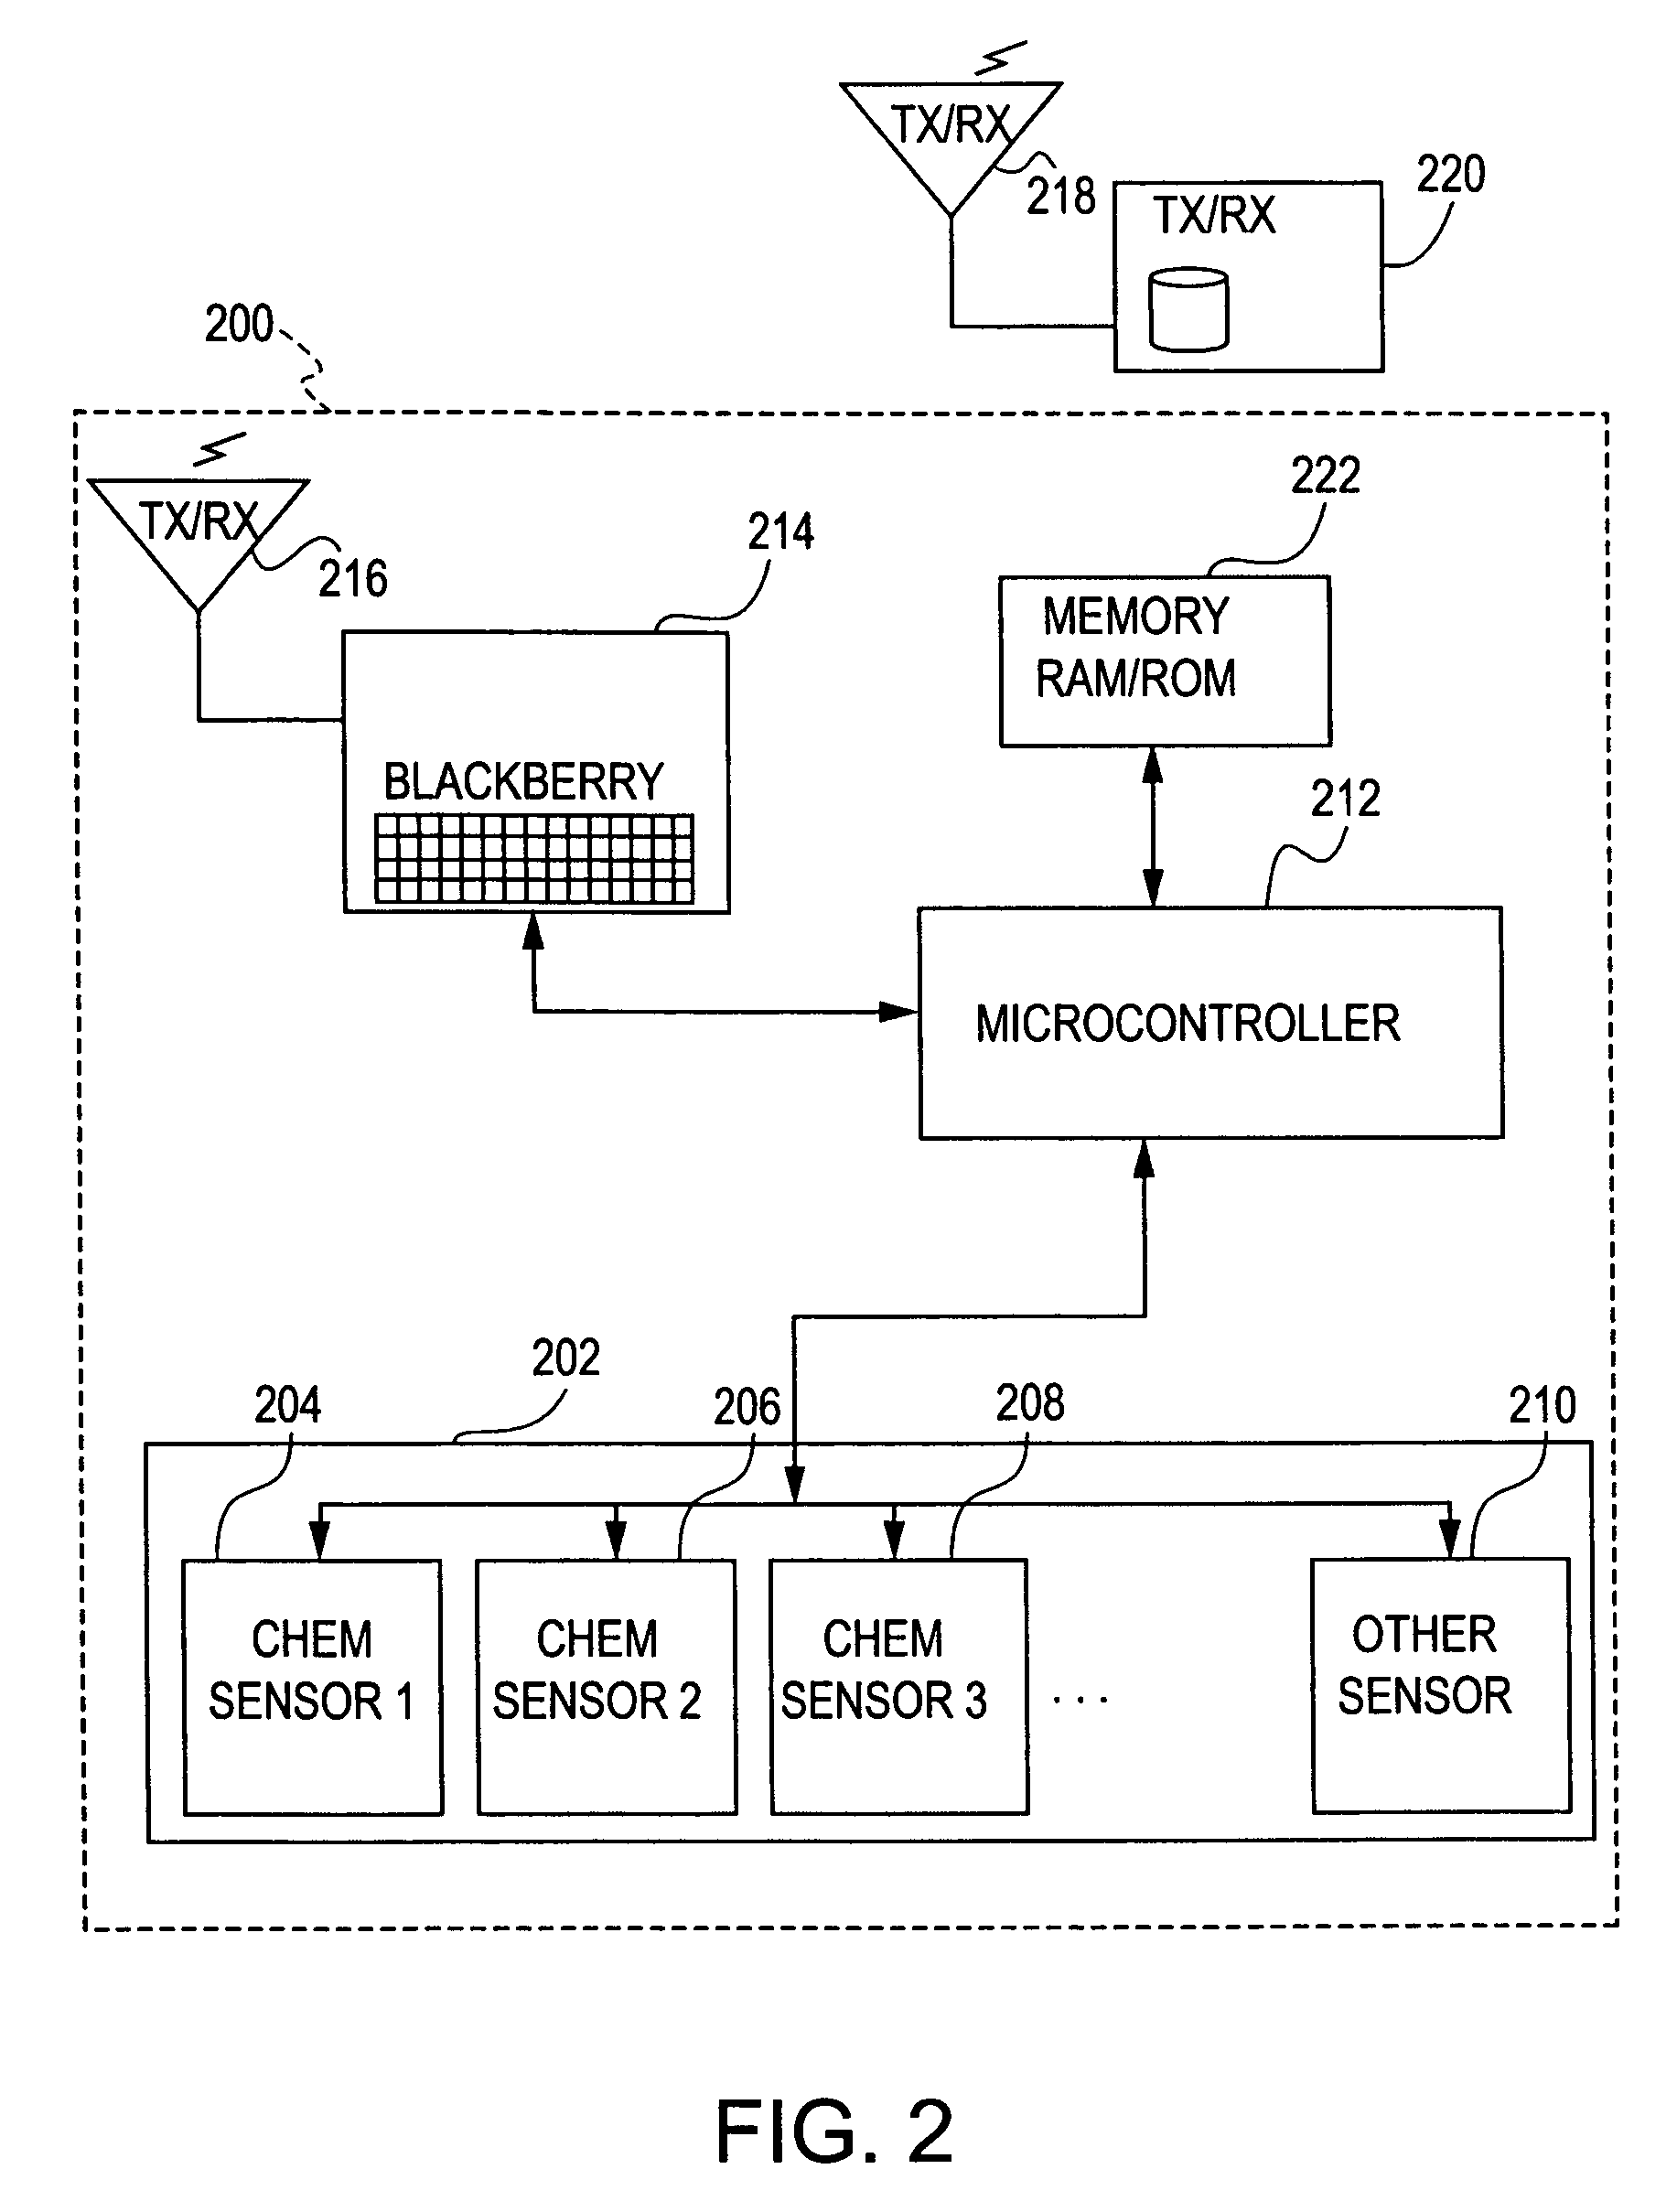 System and method for monitoring environmental conditions